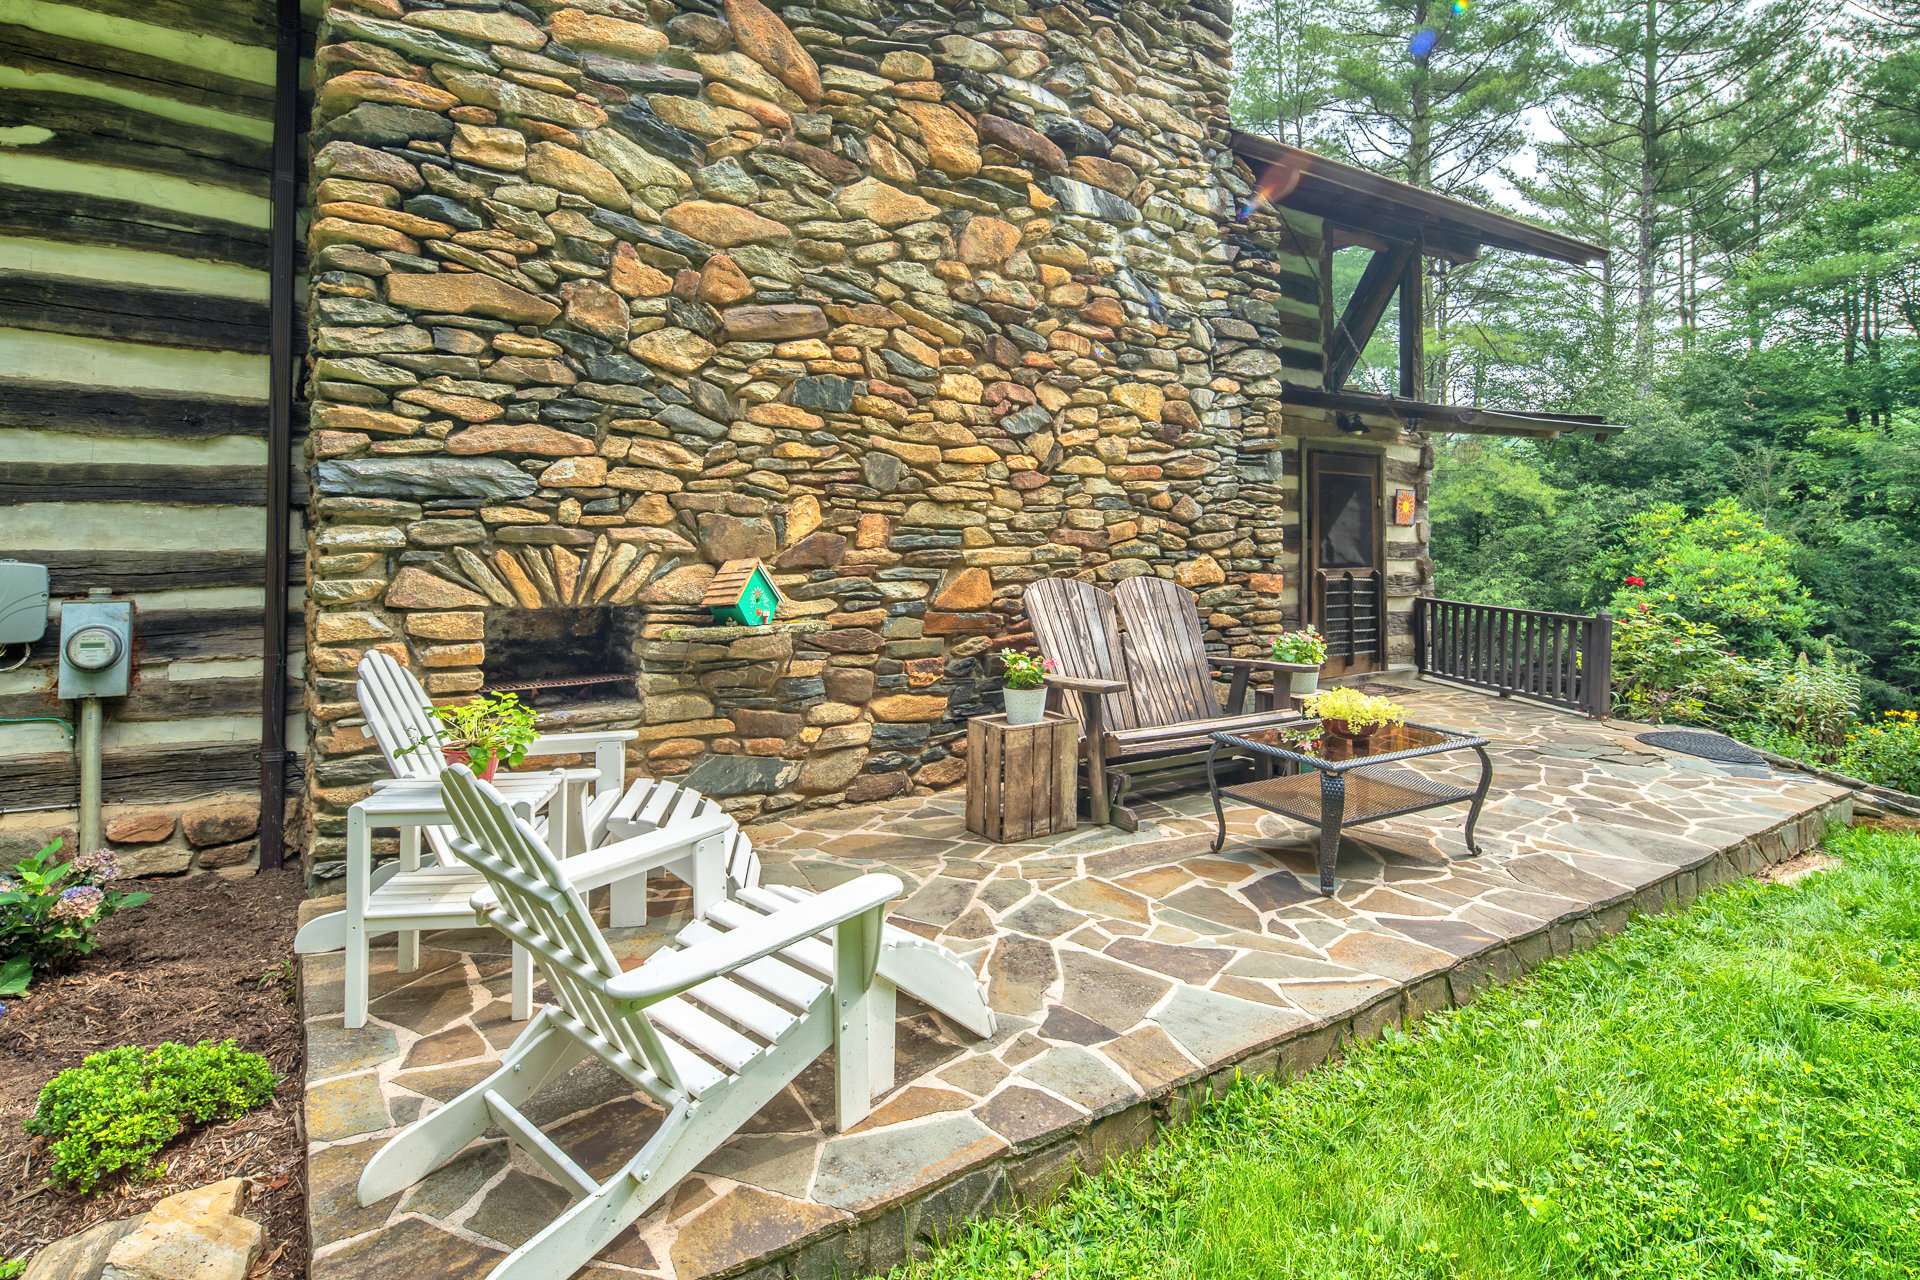 Read a book or entertain your friends and family on the stone front patio, complete with a stone oven.  This property is truly a work of art.